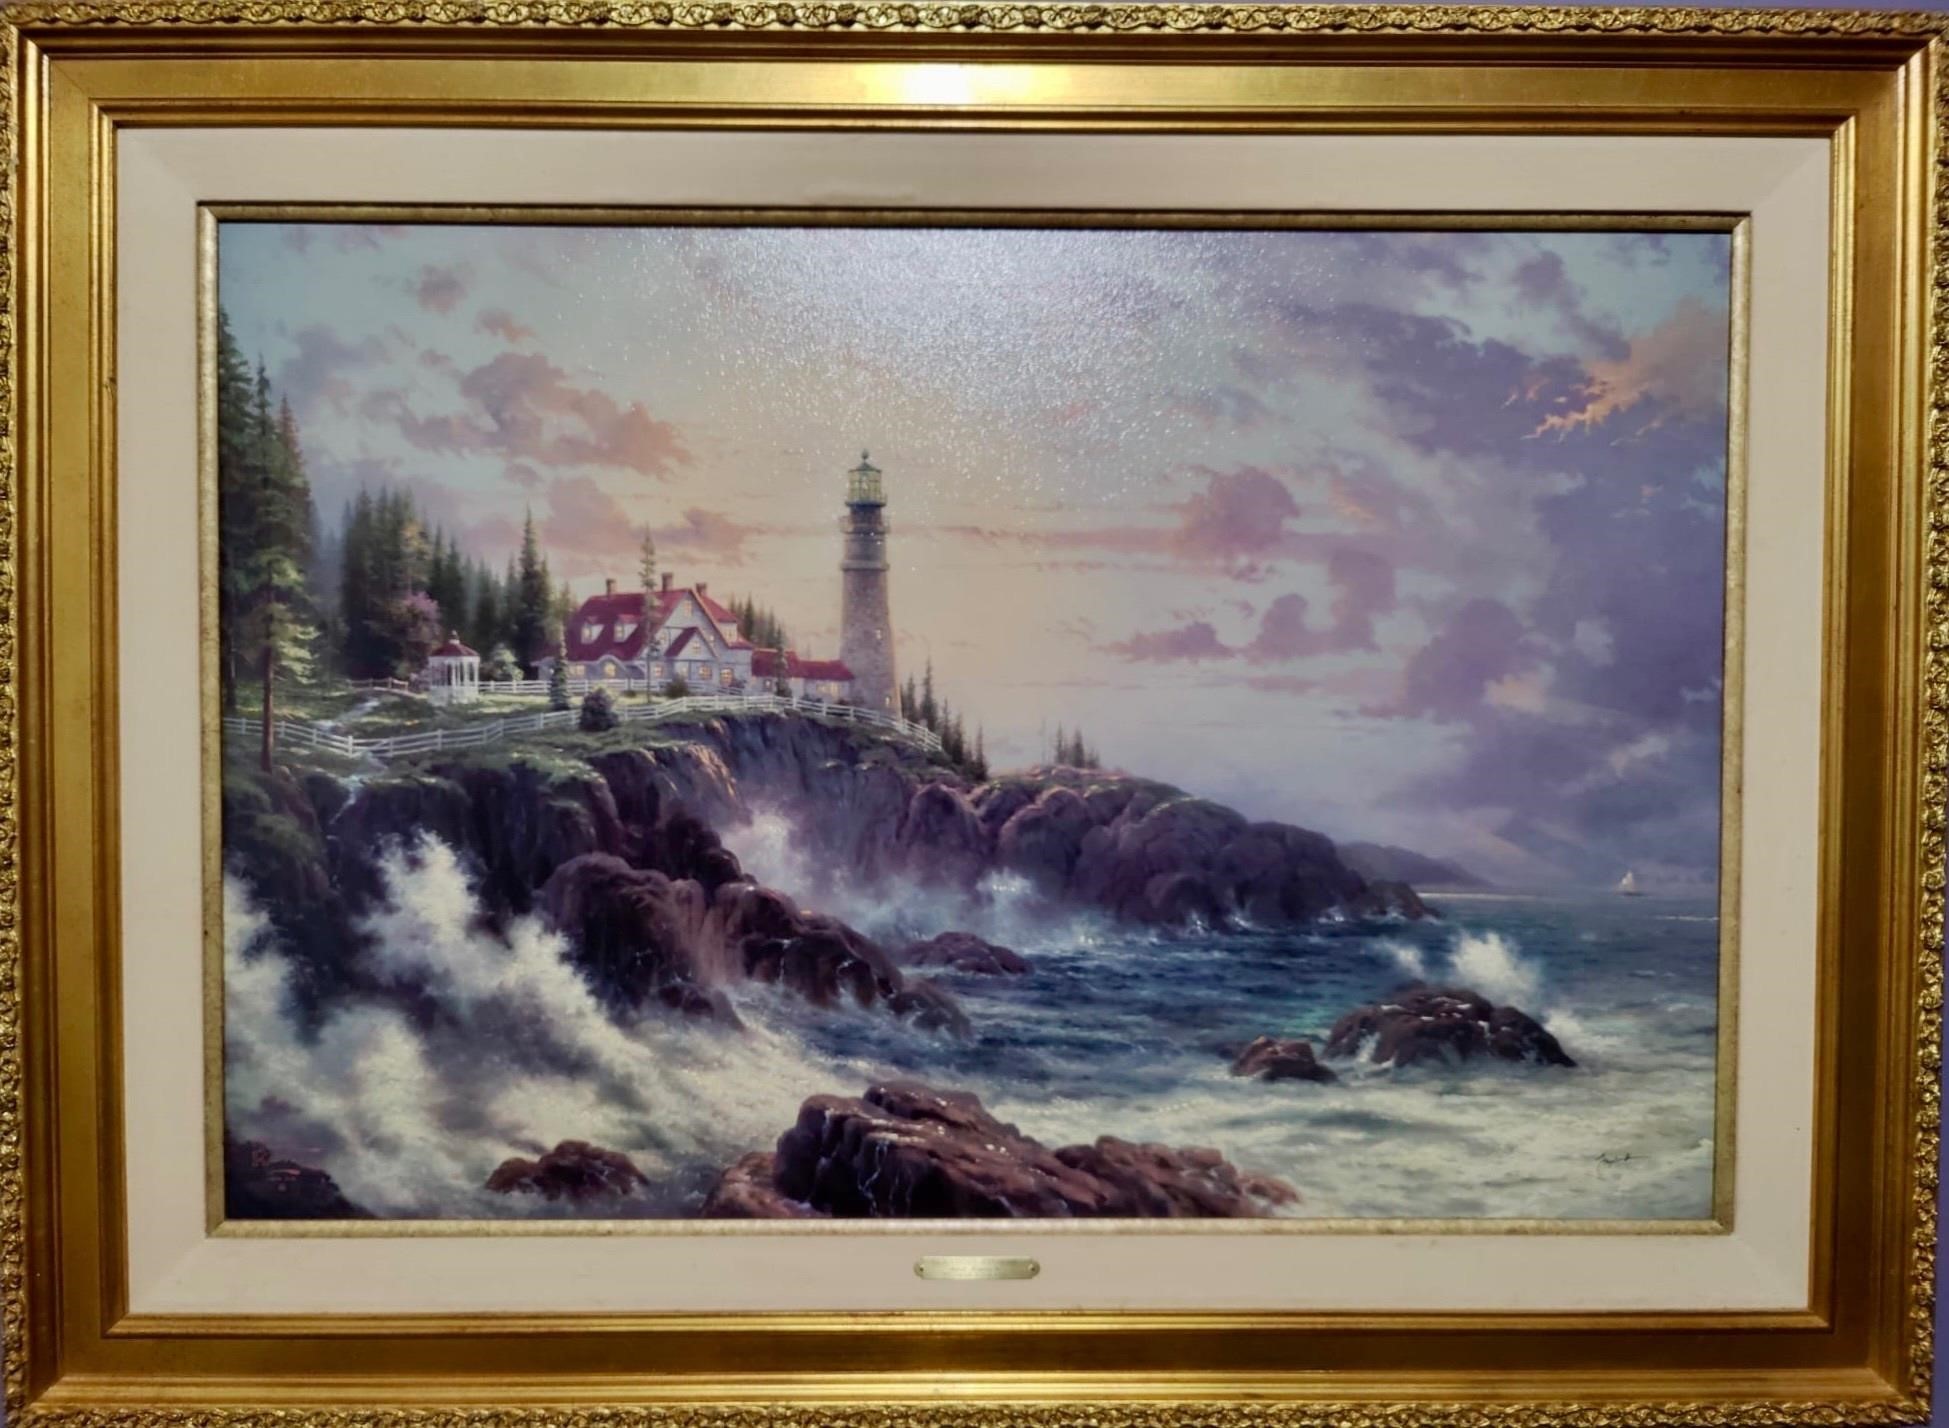 Thomas Kinkade "Clearing Storms" Canvas Lithograph